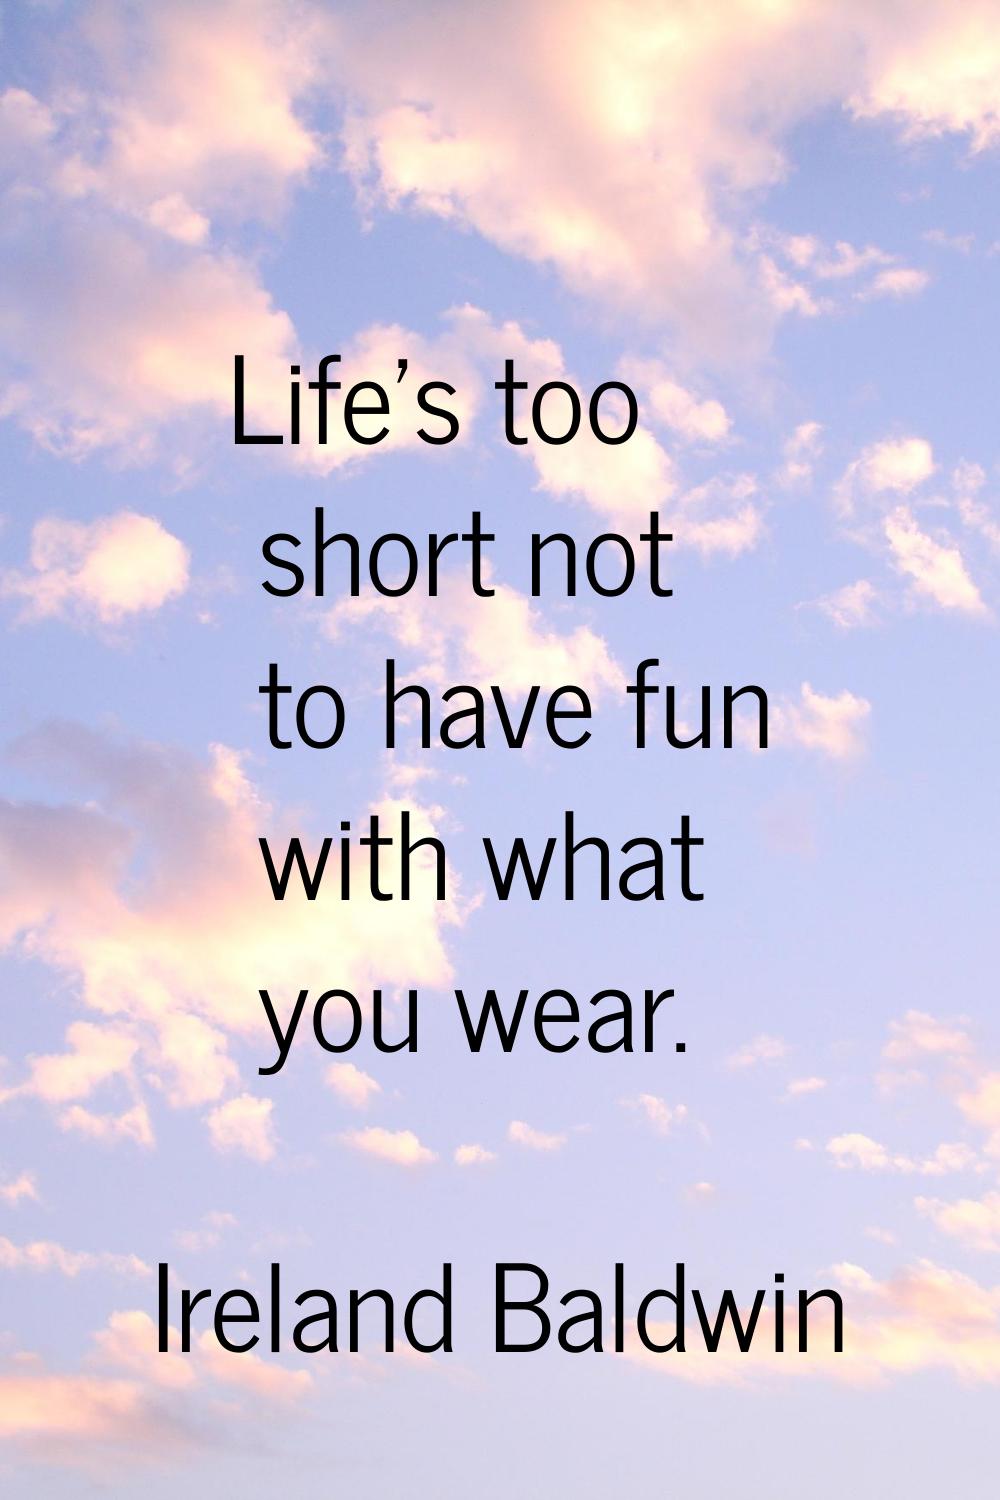 Life's too short not to have fun with what you wear.